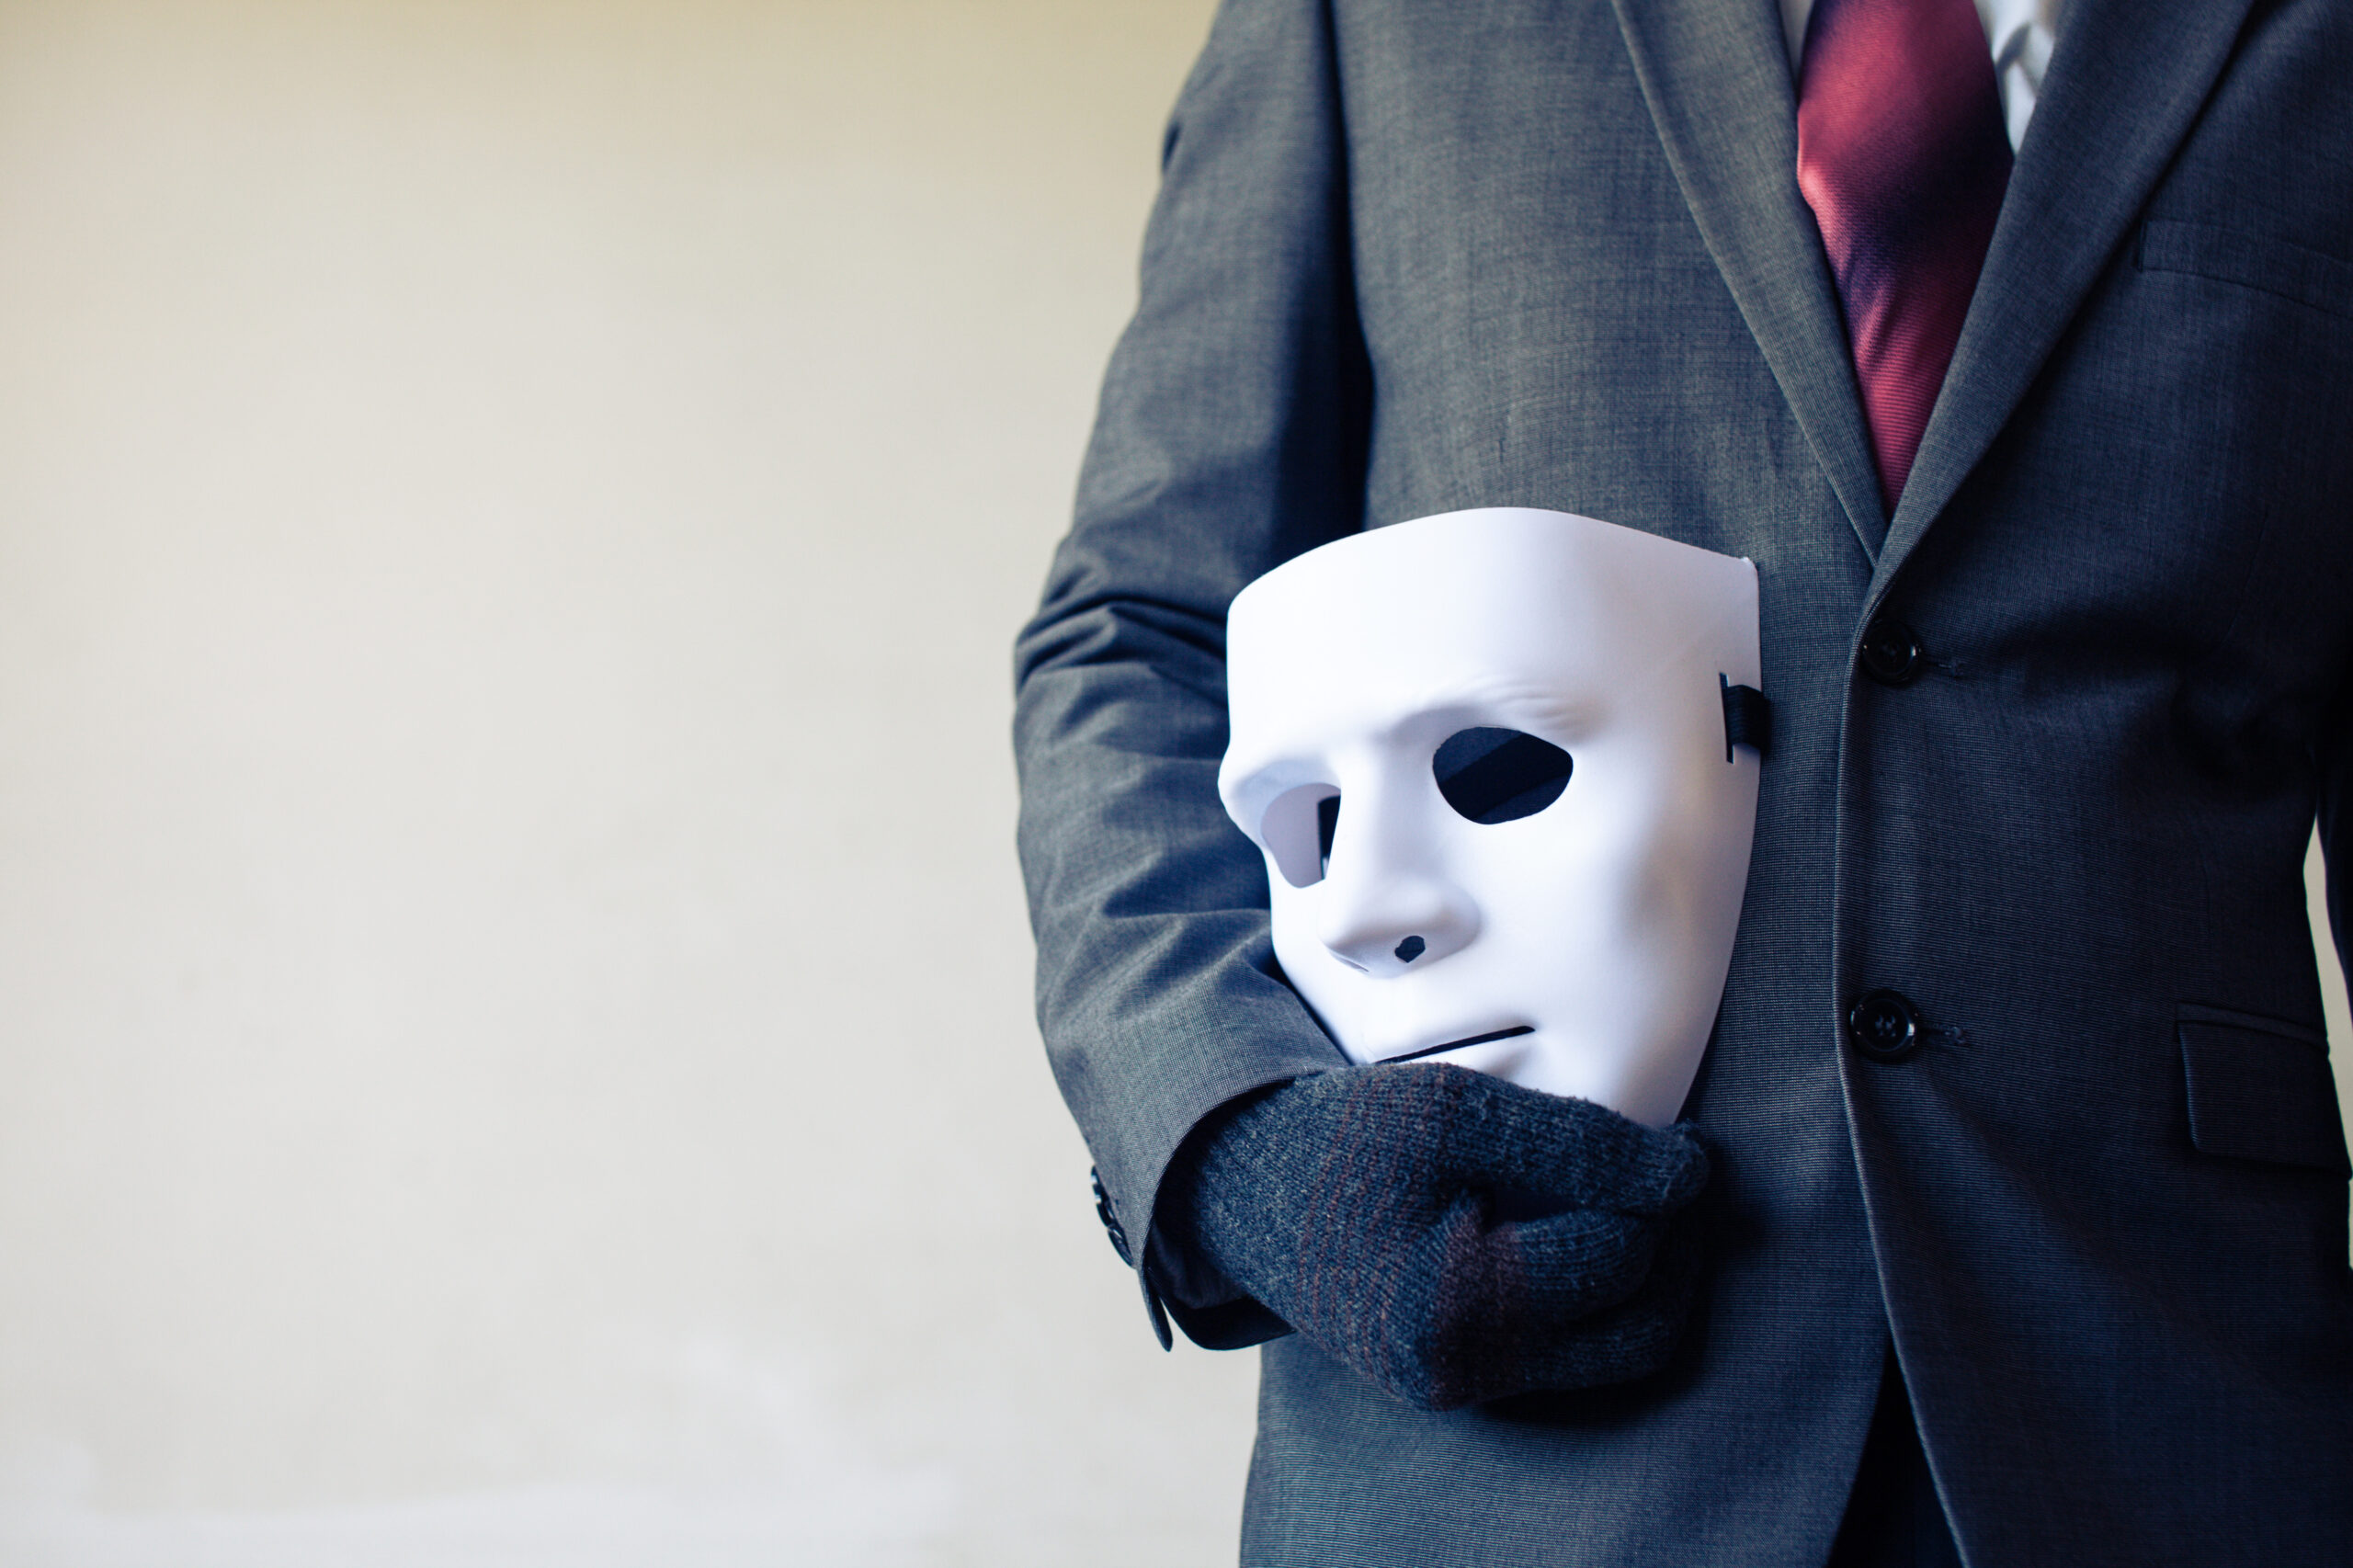 Man in a Suit With a Mask by His SIde